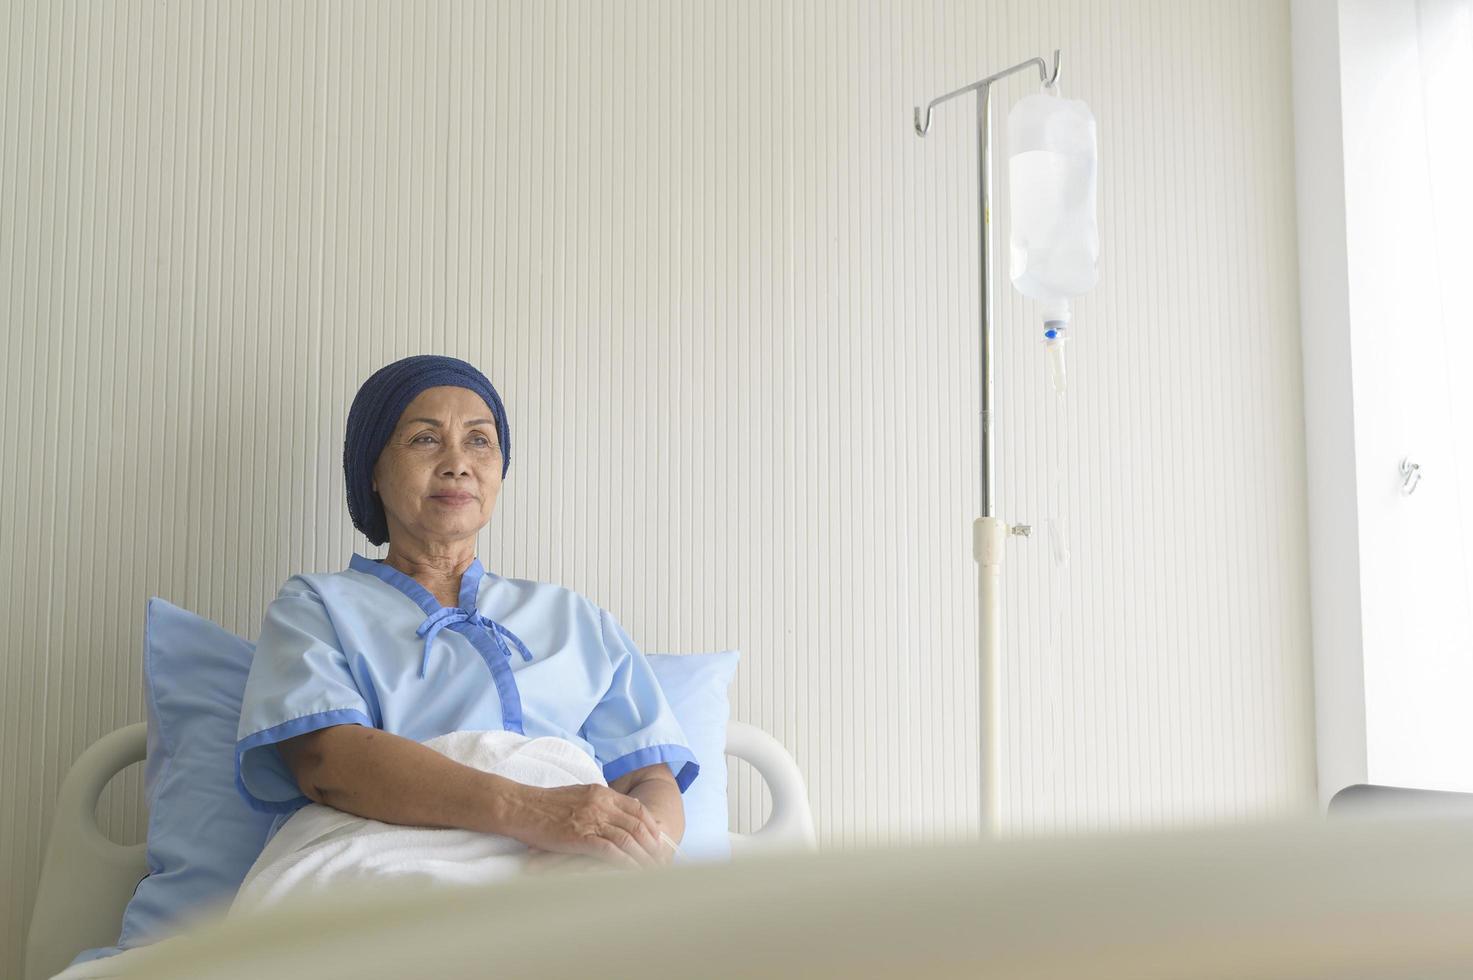 Portrait of senior cancer patient woman wearing head scarf in hospital, healthcare and medical concept photo